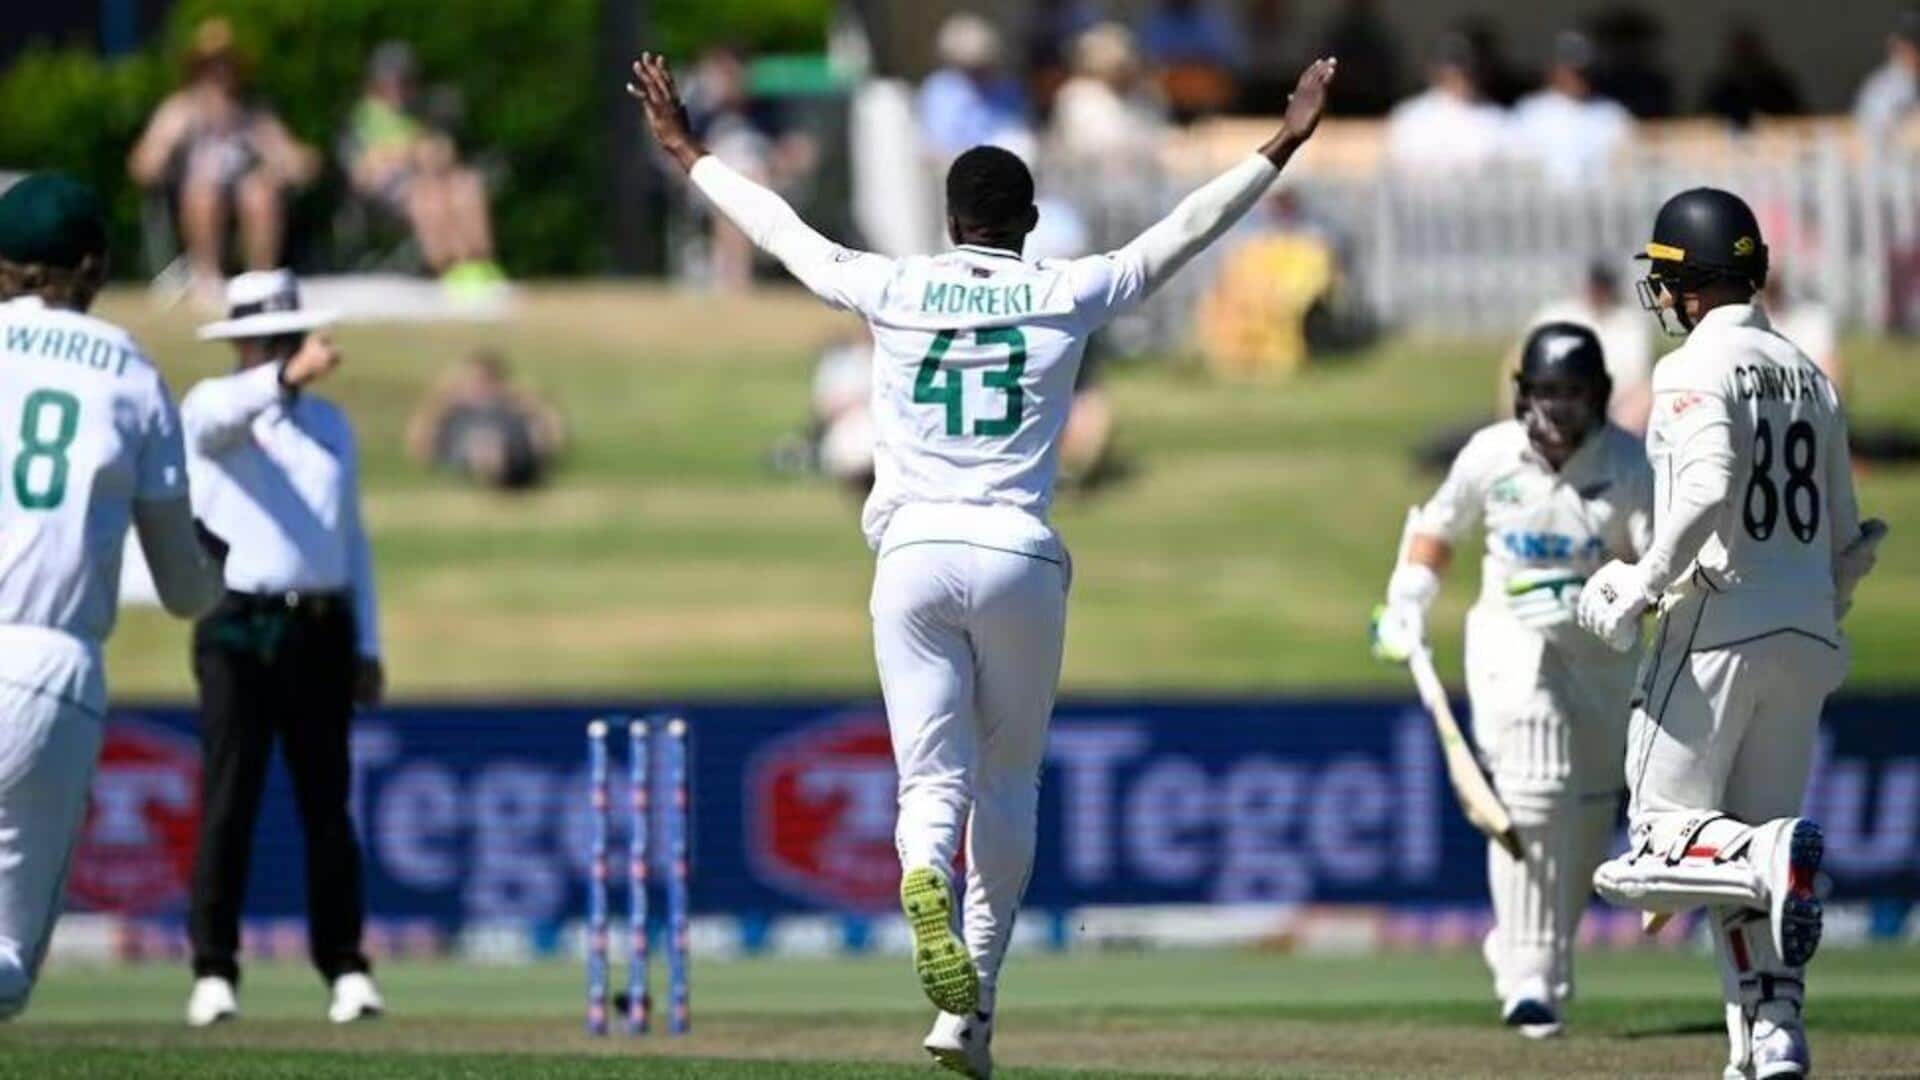 SA's Moreki claims wicket off first ball, joins this list